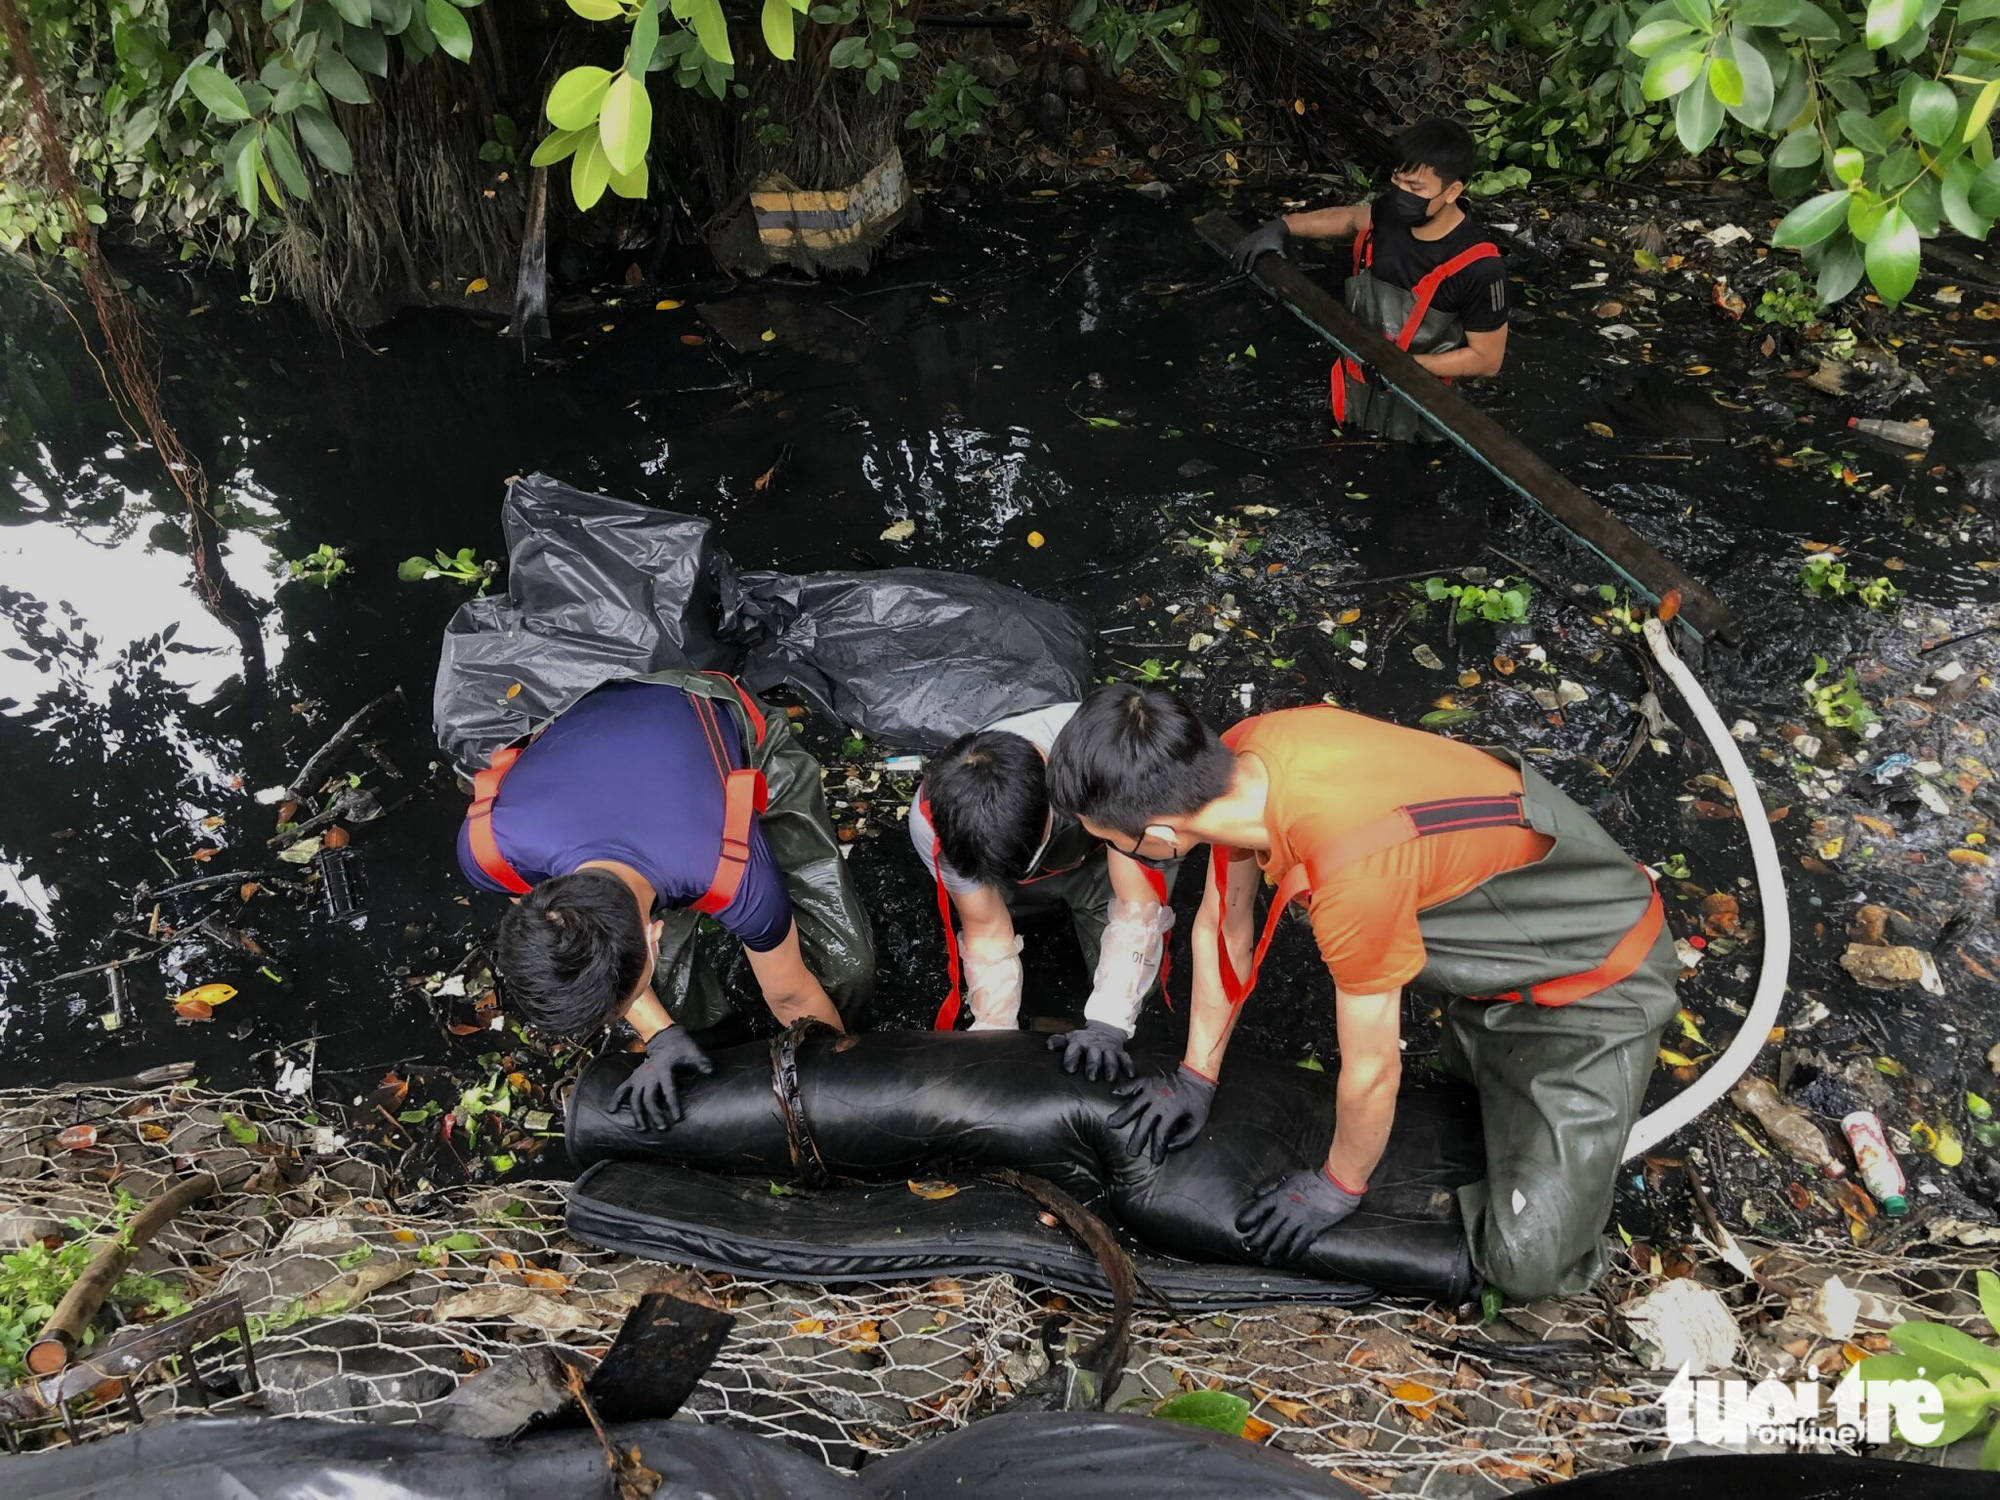 They pull a 60-kilogram mattress soaked in water and mud from the bottom of a river.